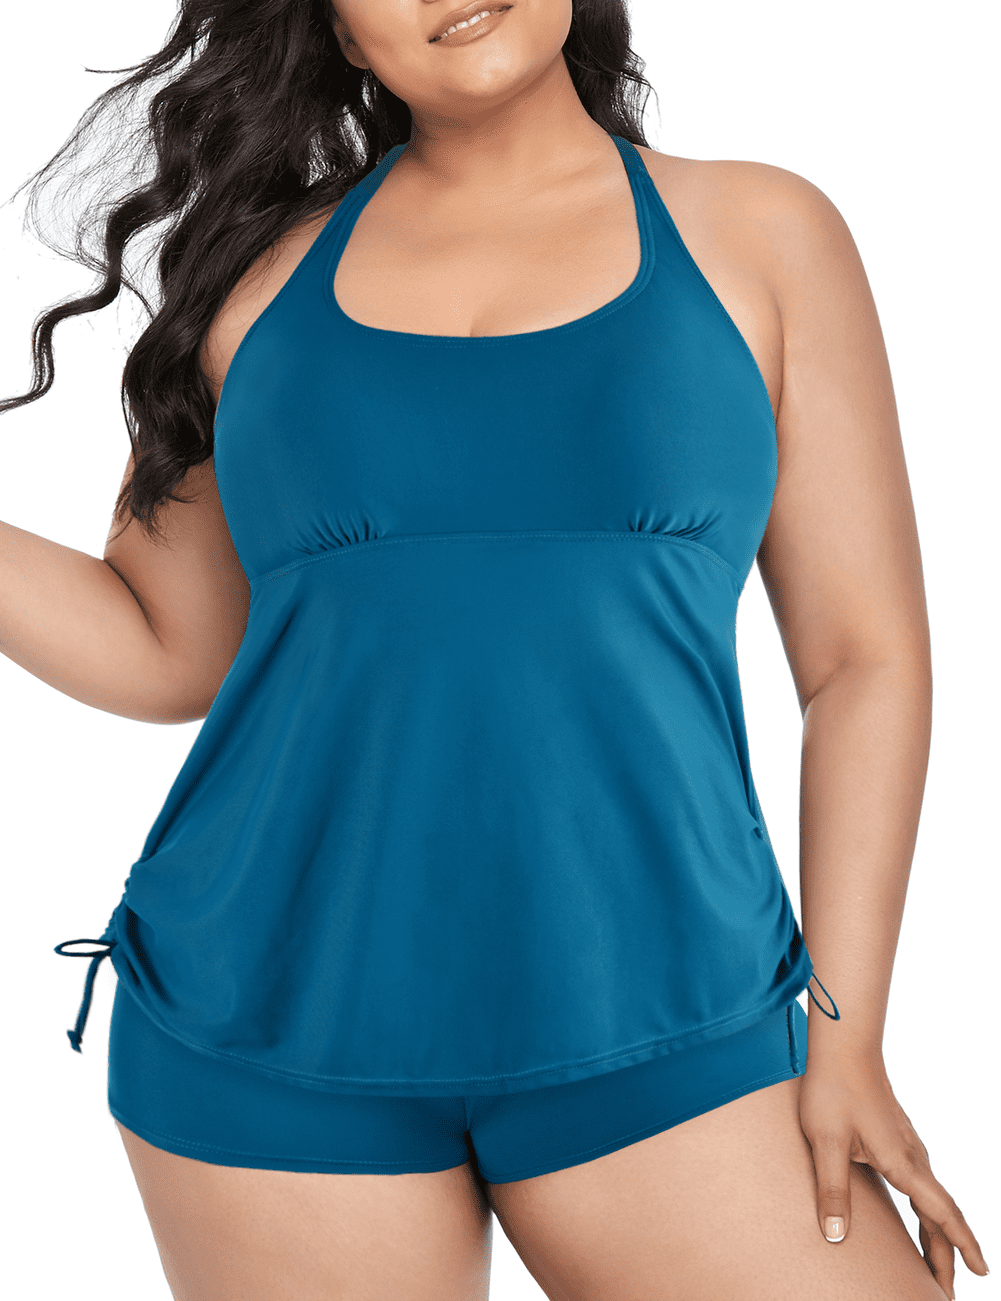 LLUO Plus Size Tankini Swimsuits for Women Two Piece Print Strappy Back Swimsuits Swimdress Bathing Suits with Shorts 